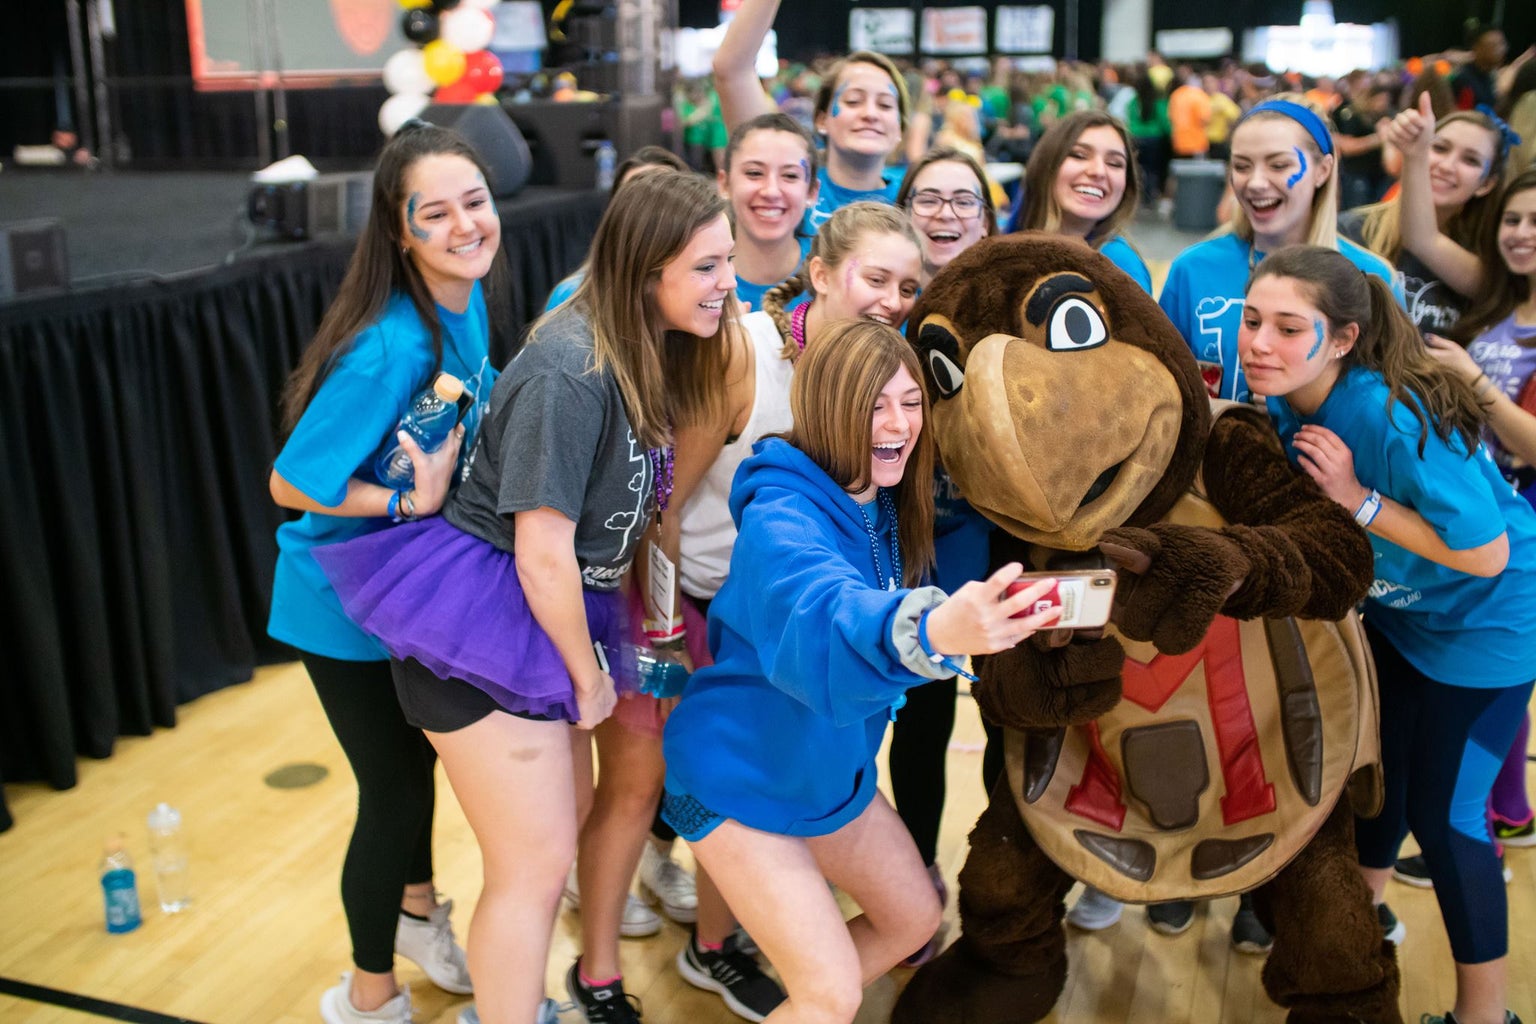 Original photos via on campus organization, Terp Thon. Images are to be used with an upcoming article featuring the 12-hour philanthropy event coming up.